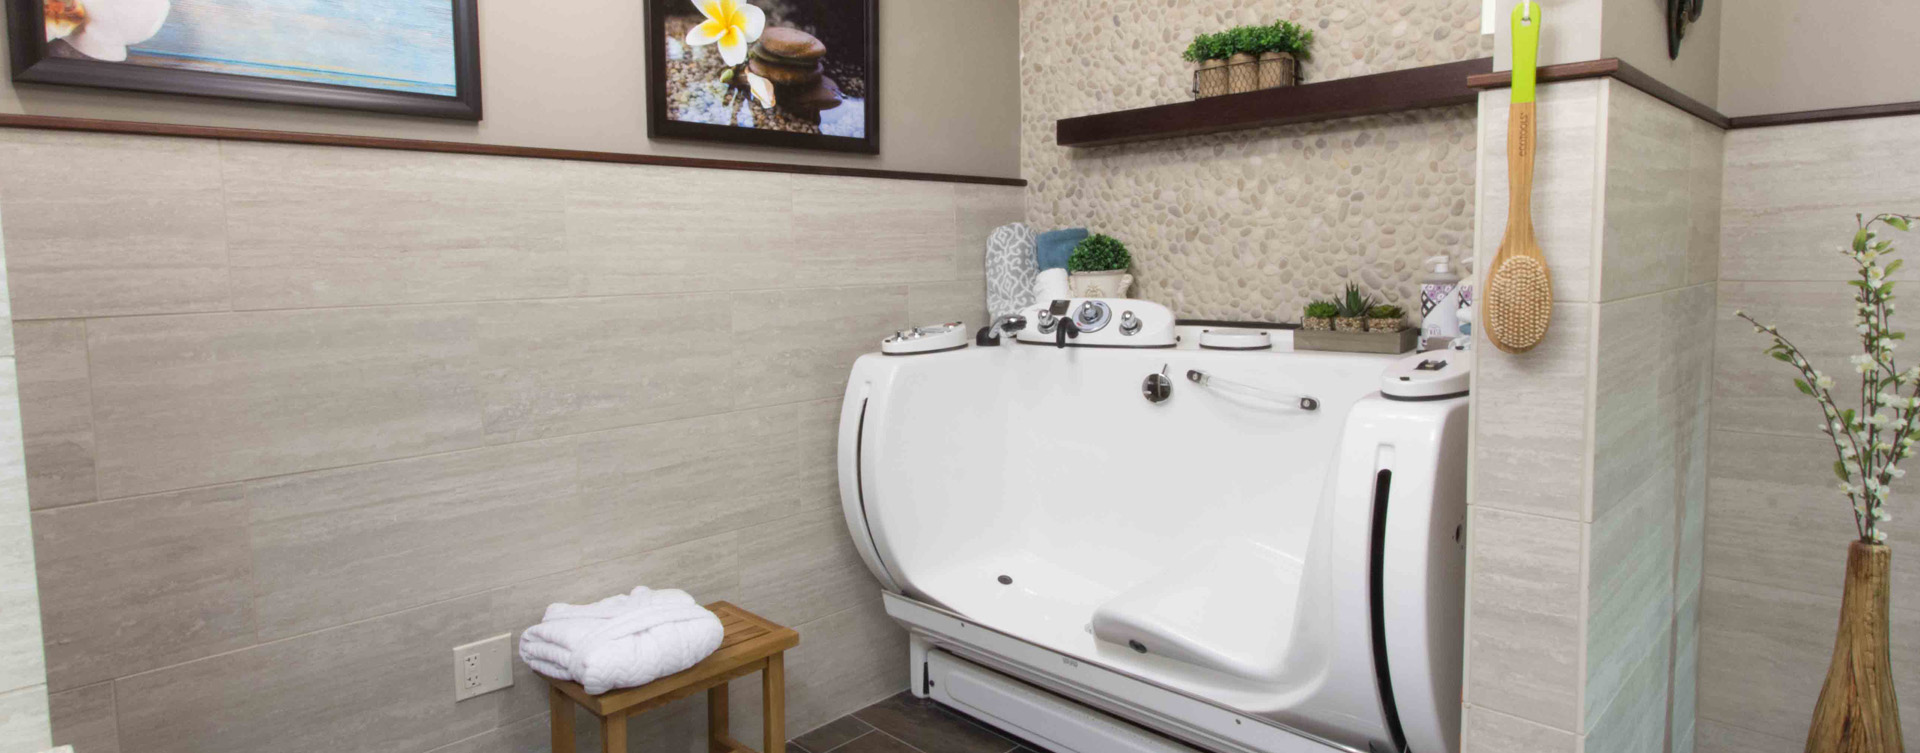 With an easy access design, our whirlpool allows you to enjoy a warm bath safely and comfortably at Bickford of Gurnee